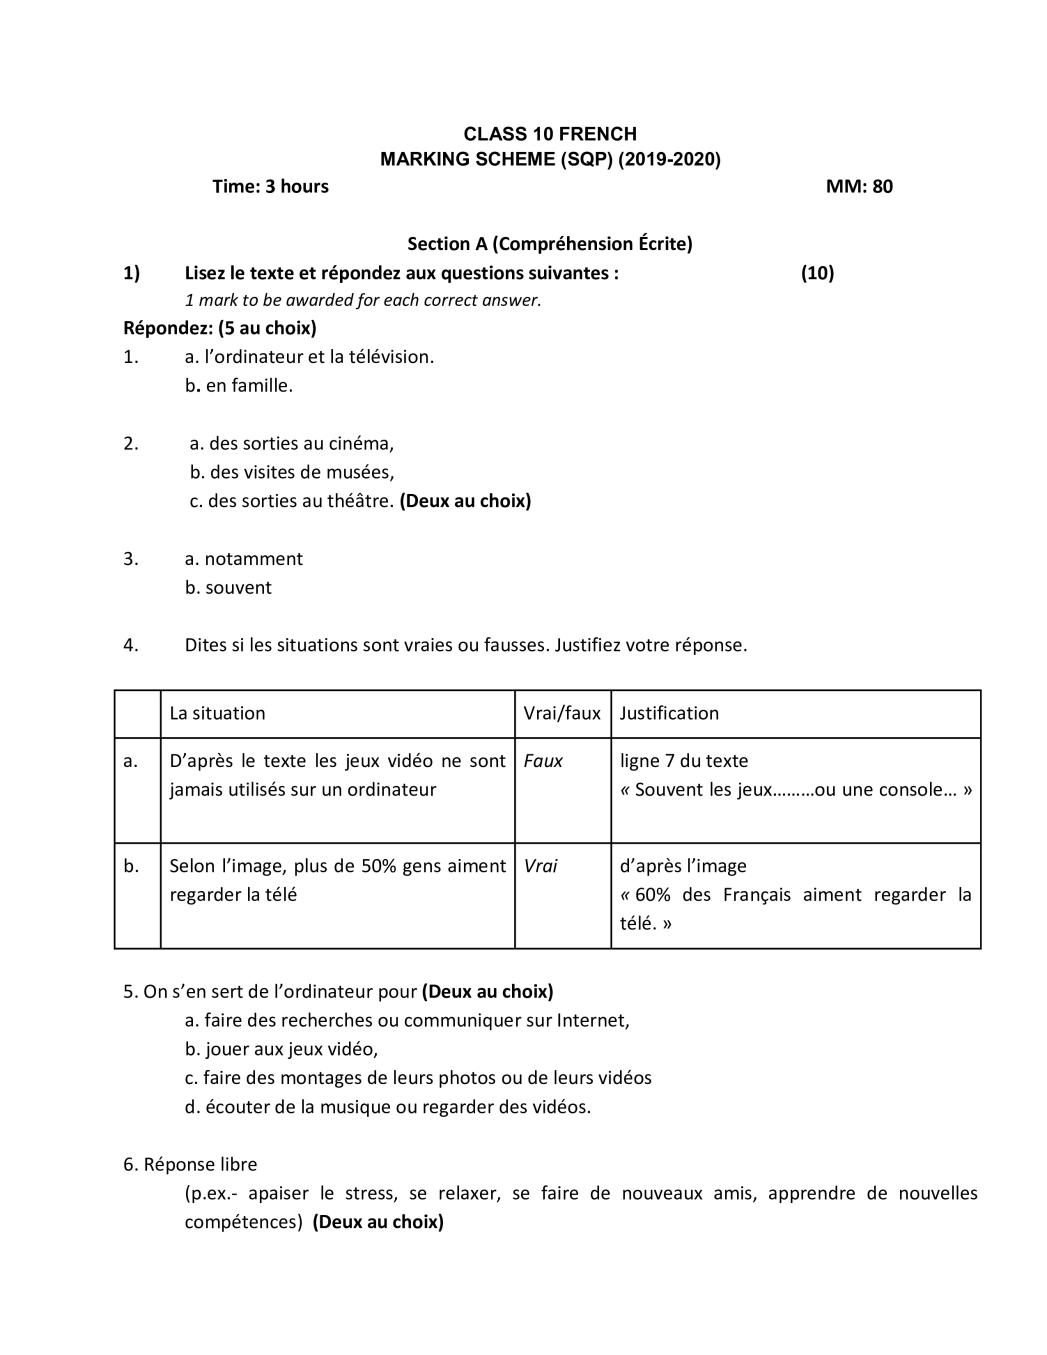 CBSE Class 10 Marking Scheme 2020 for French - Page 1